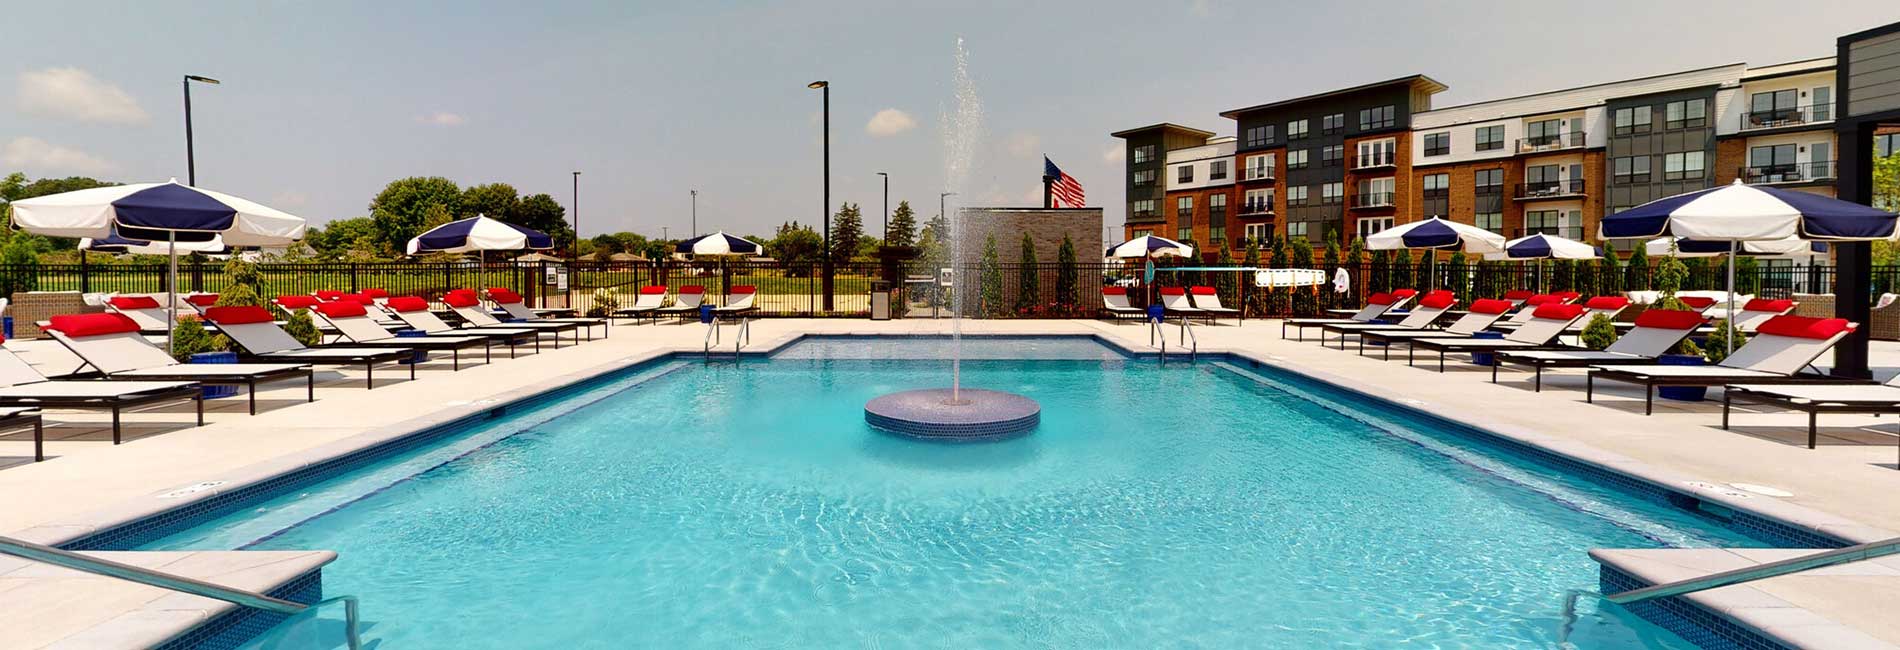 Hanover Park with Sparkling Swimming Pool